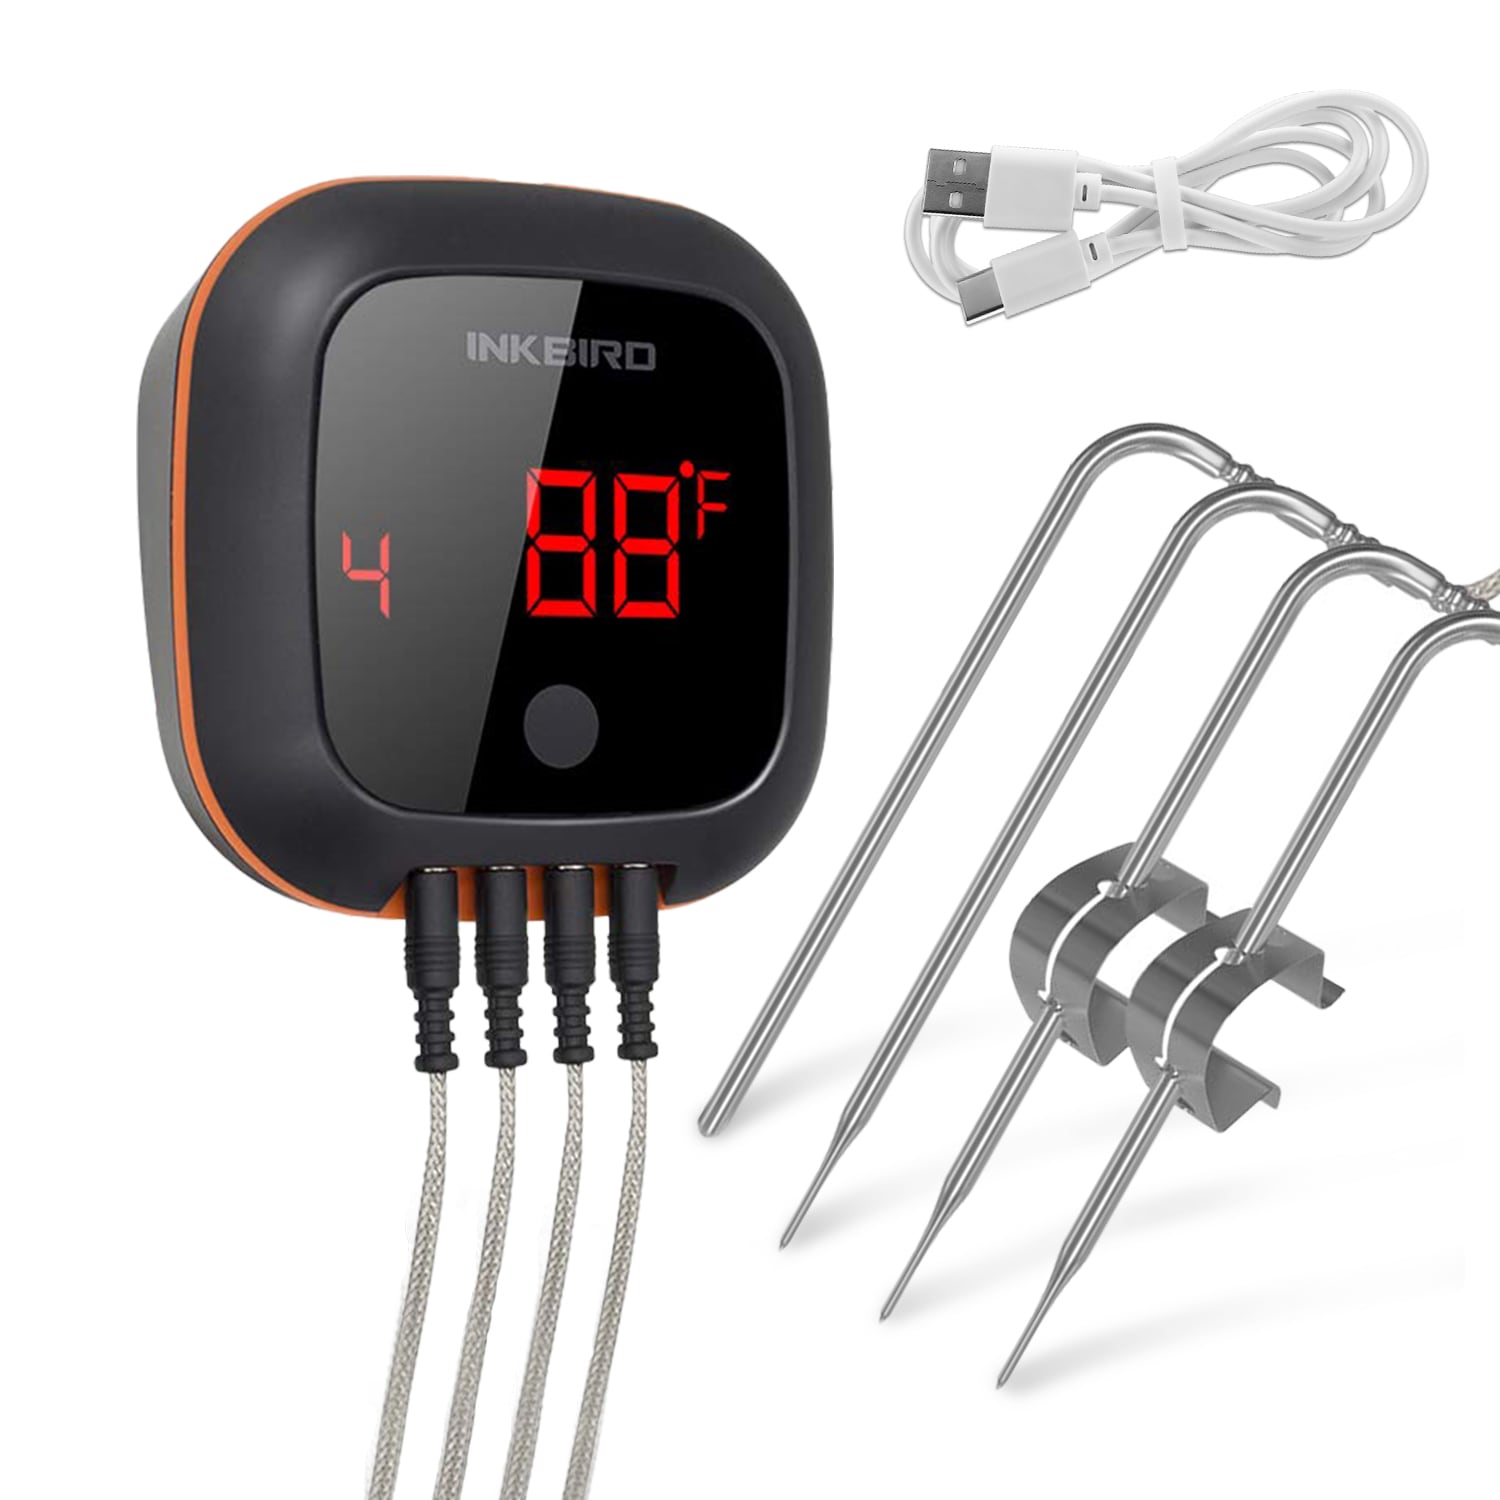 BBQ Dragon WiFi & Bluetooth Meat Thermometer